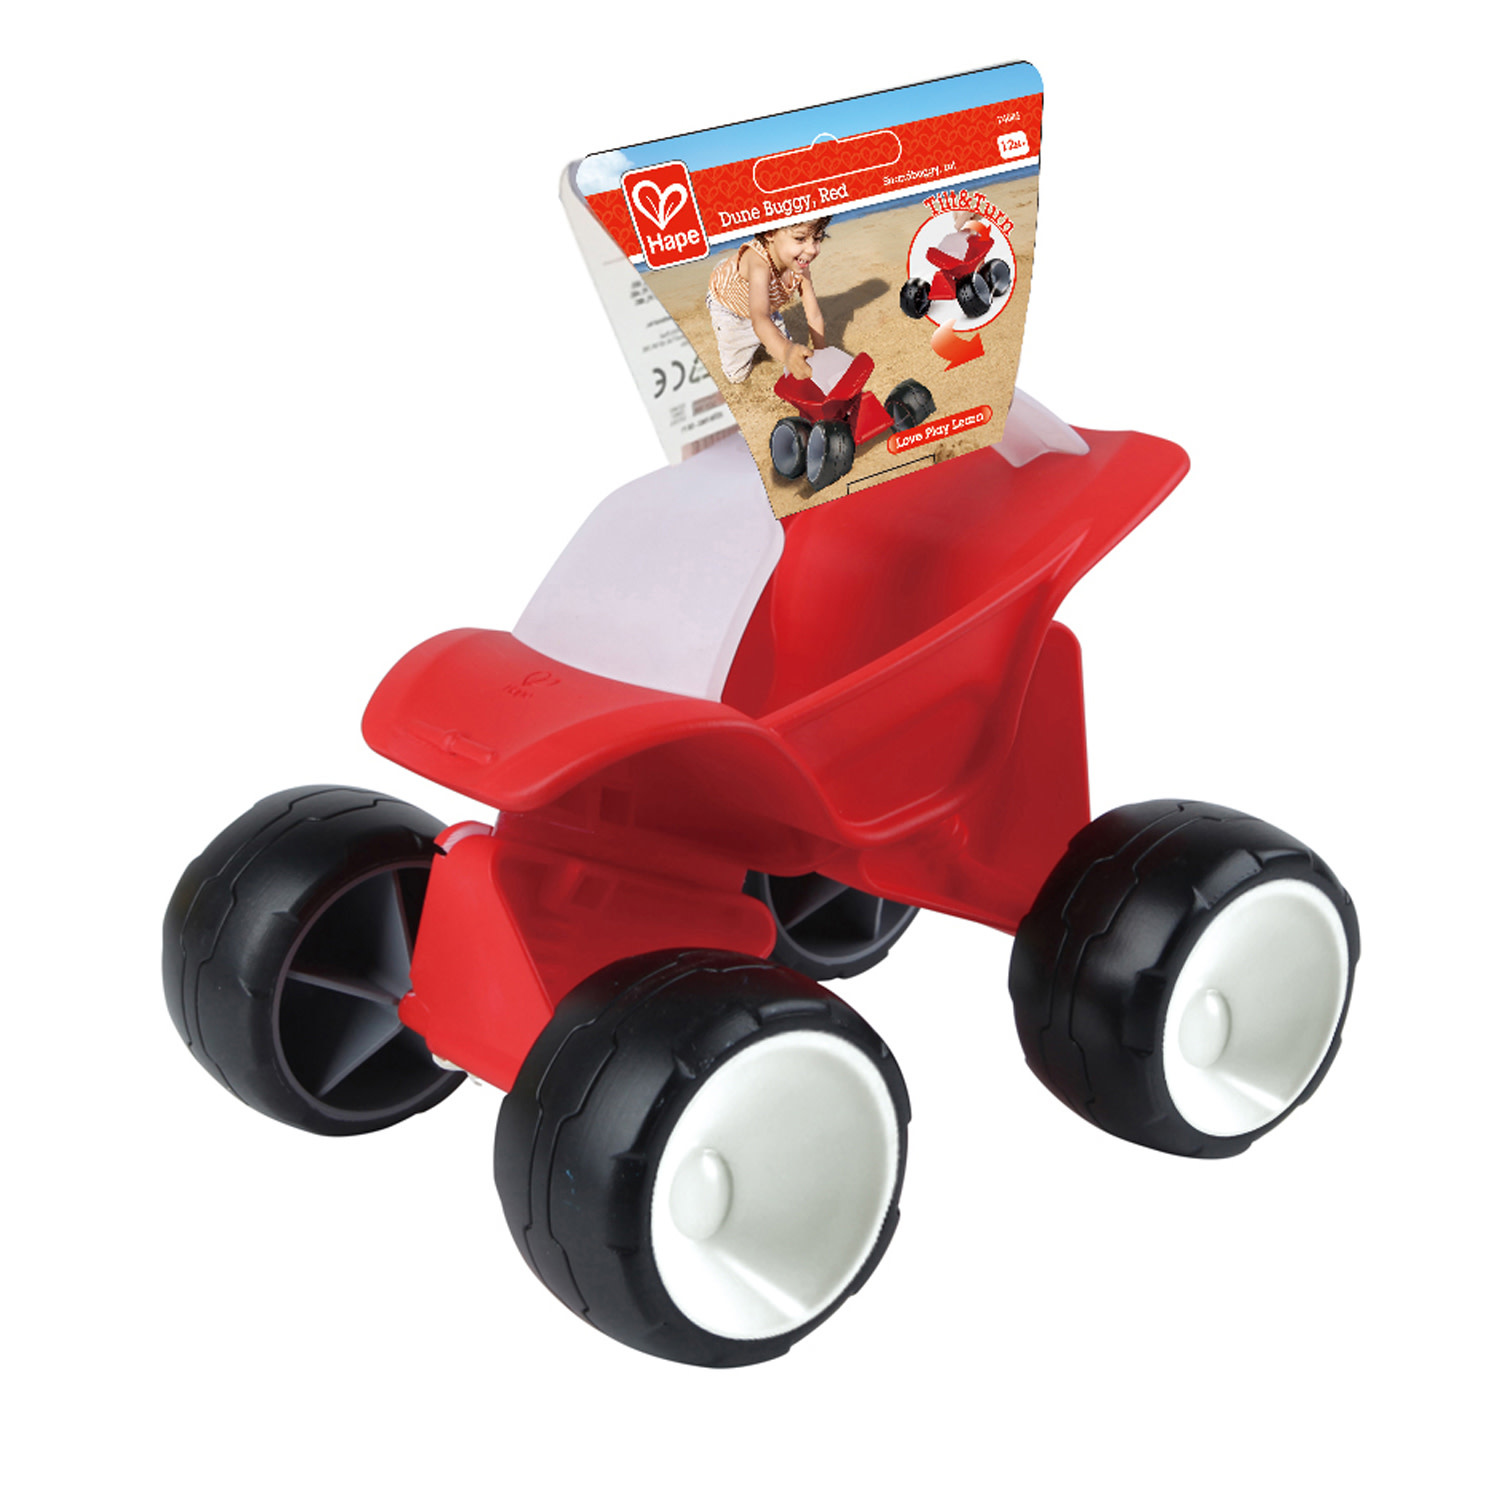 Red Dune Buggy by Hape